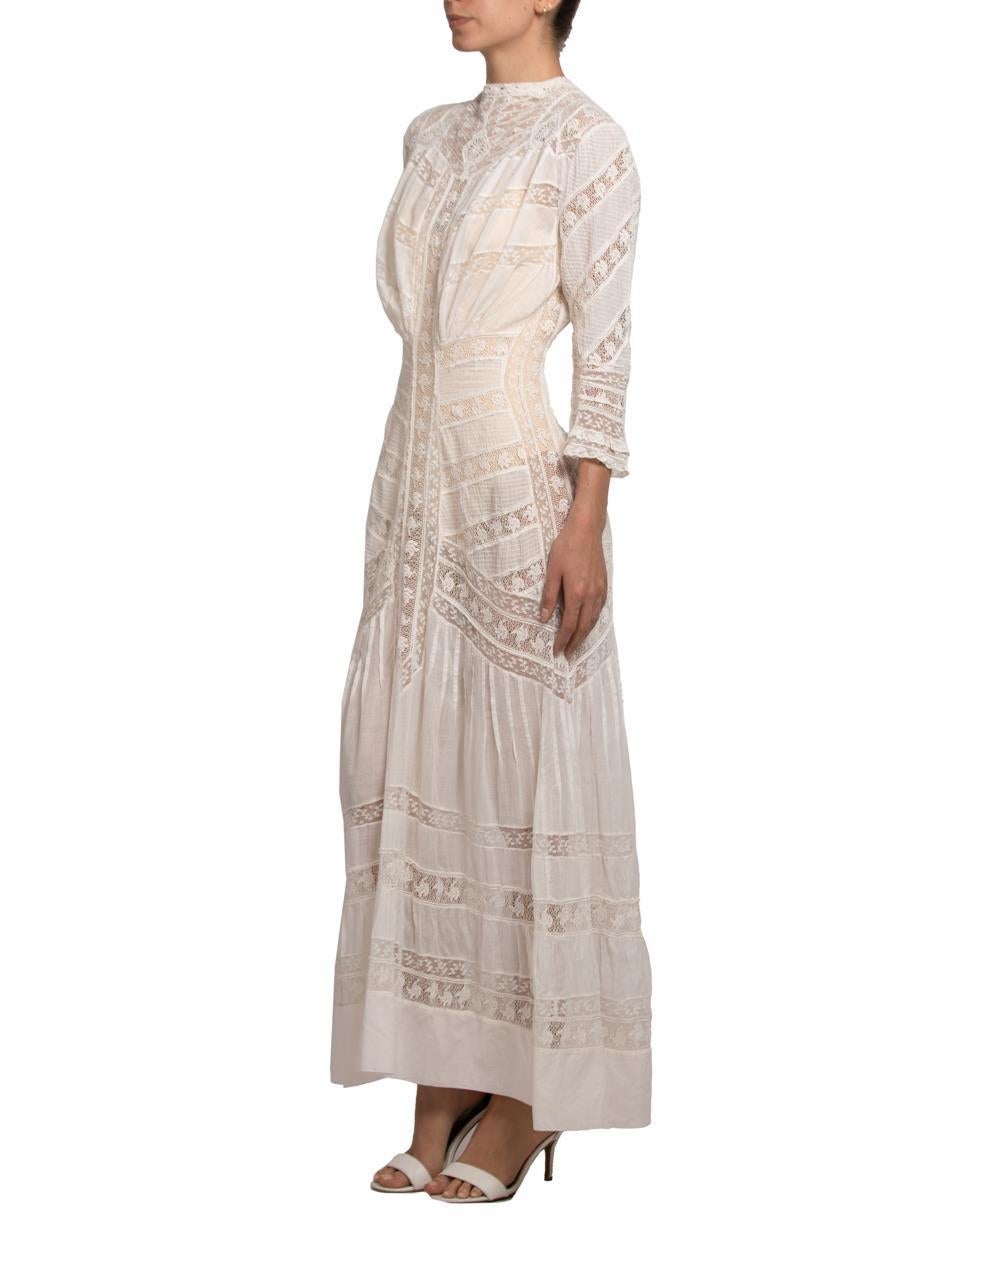 Victorian Cream Organic Cotton Lace Tea Dress With Sleeves For Sale 2